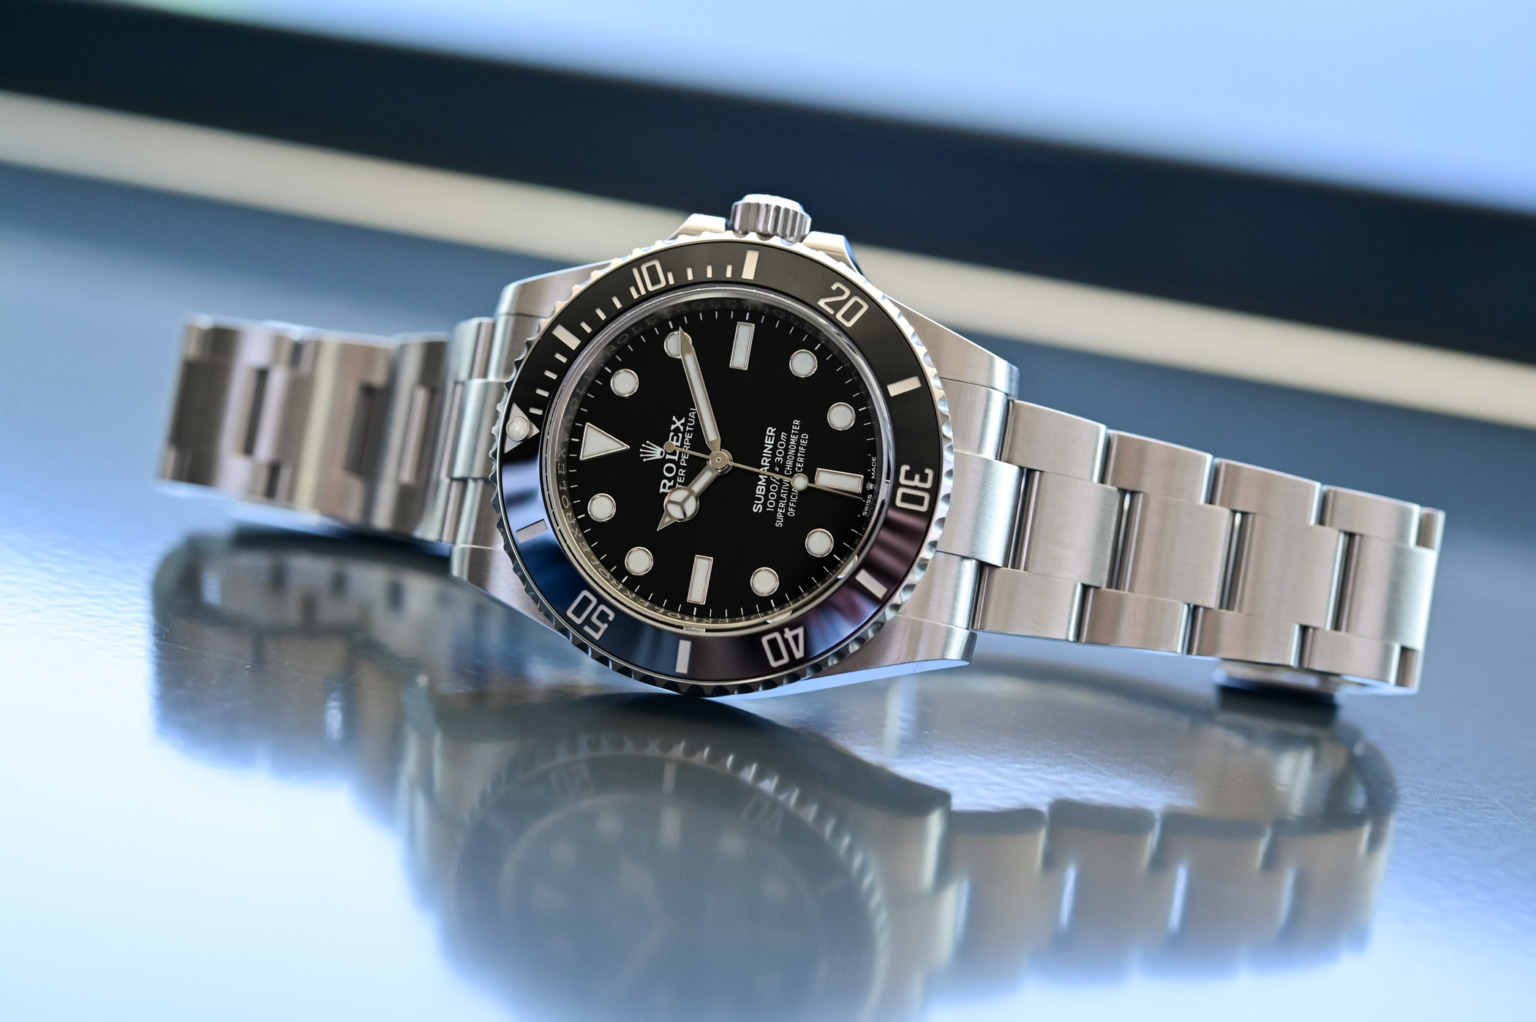 Rolex Submariner replica is one of the most popular diving watches.